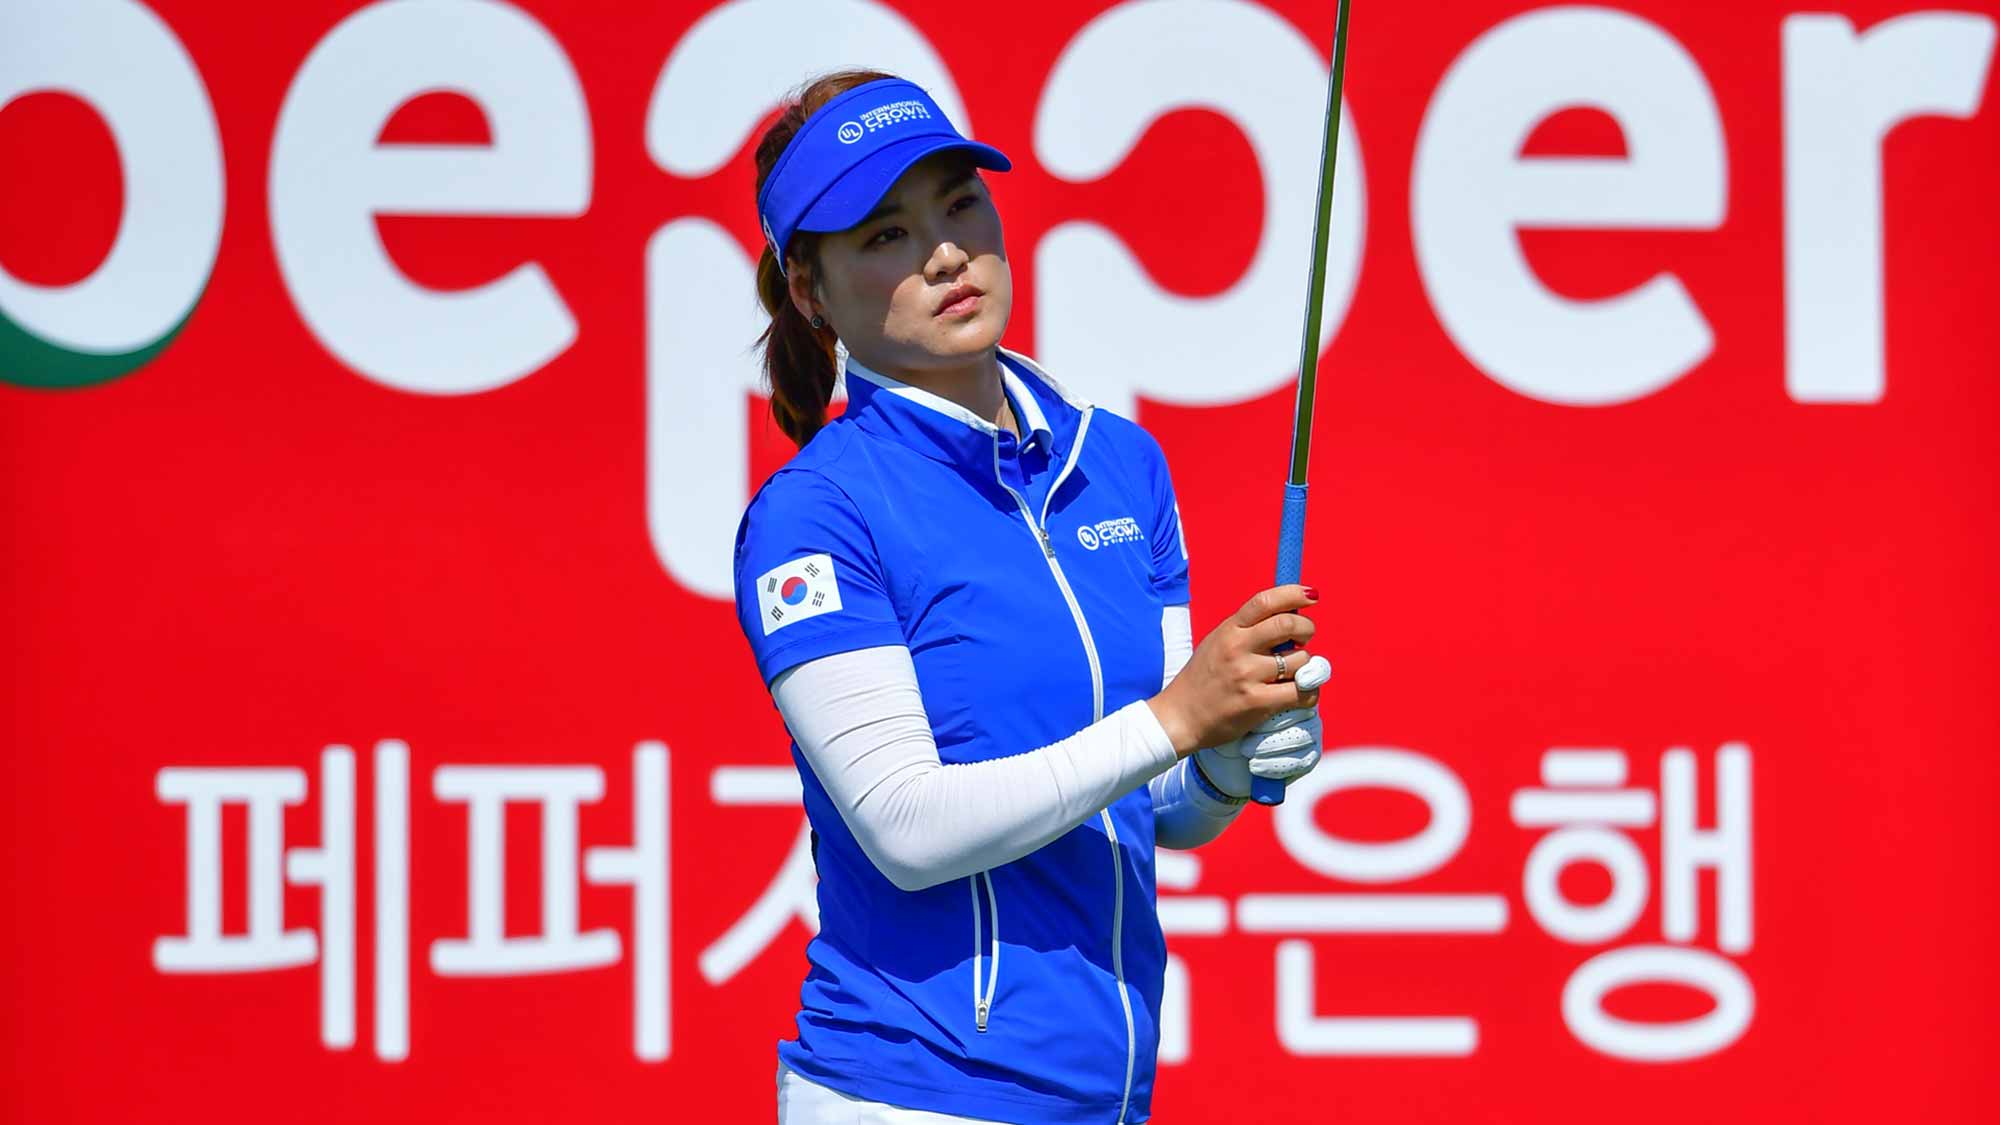 So Yeon Ryu on the tee during a practice round at the UL International Crown at Jack Nicklaus Golf Club Korea